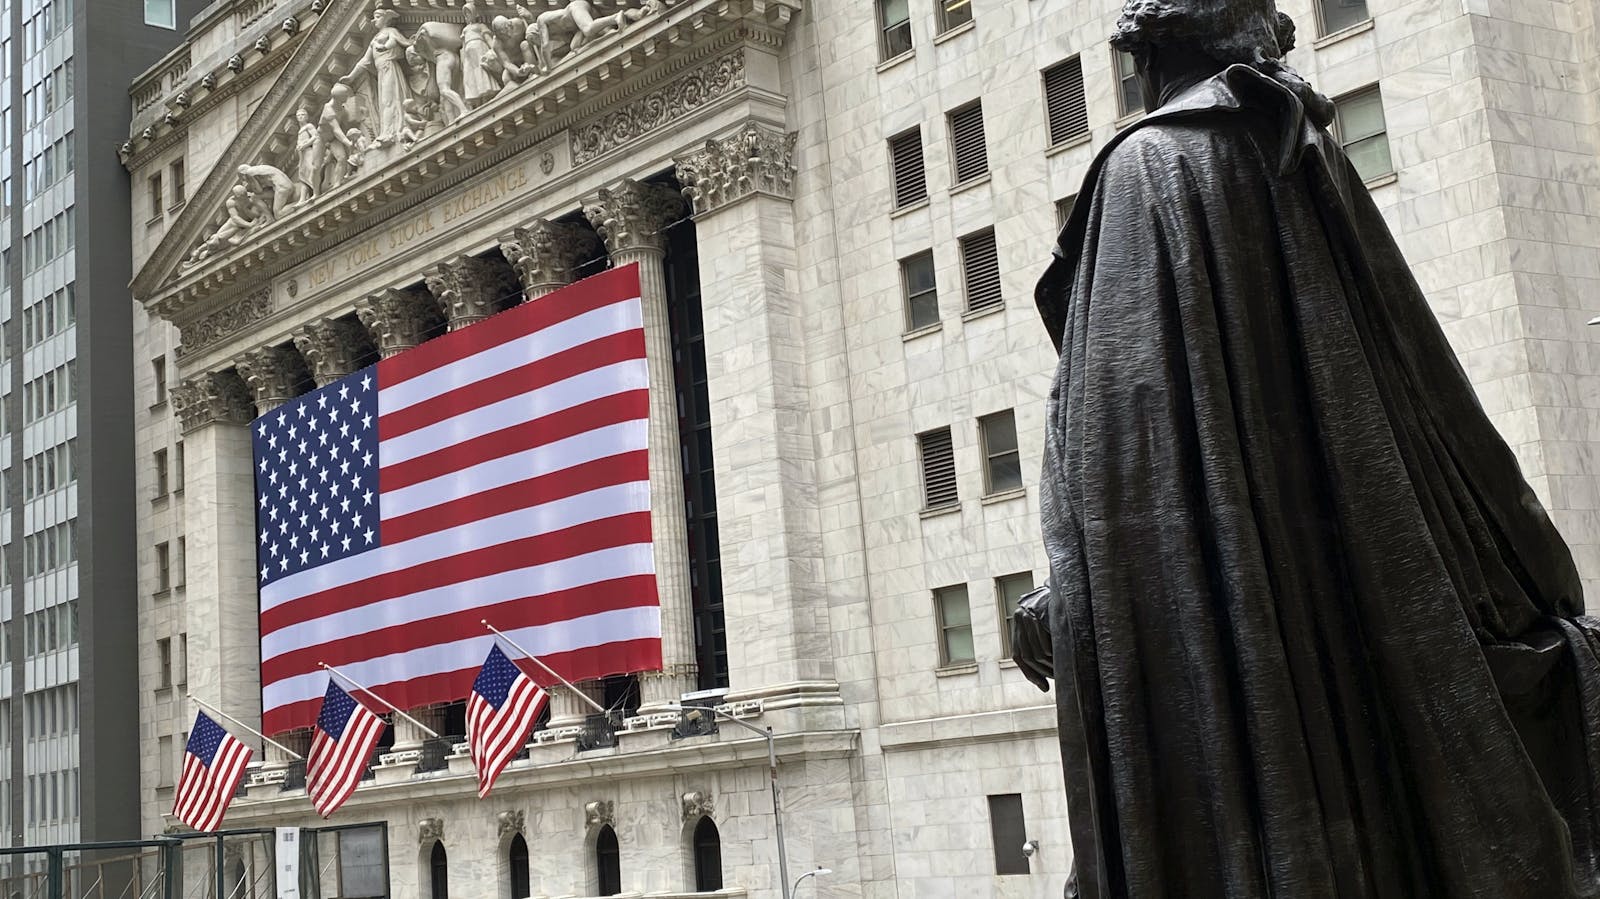 The New York Stock Exchange. Photo by AP